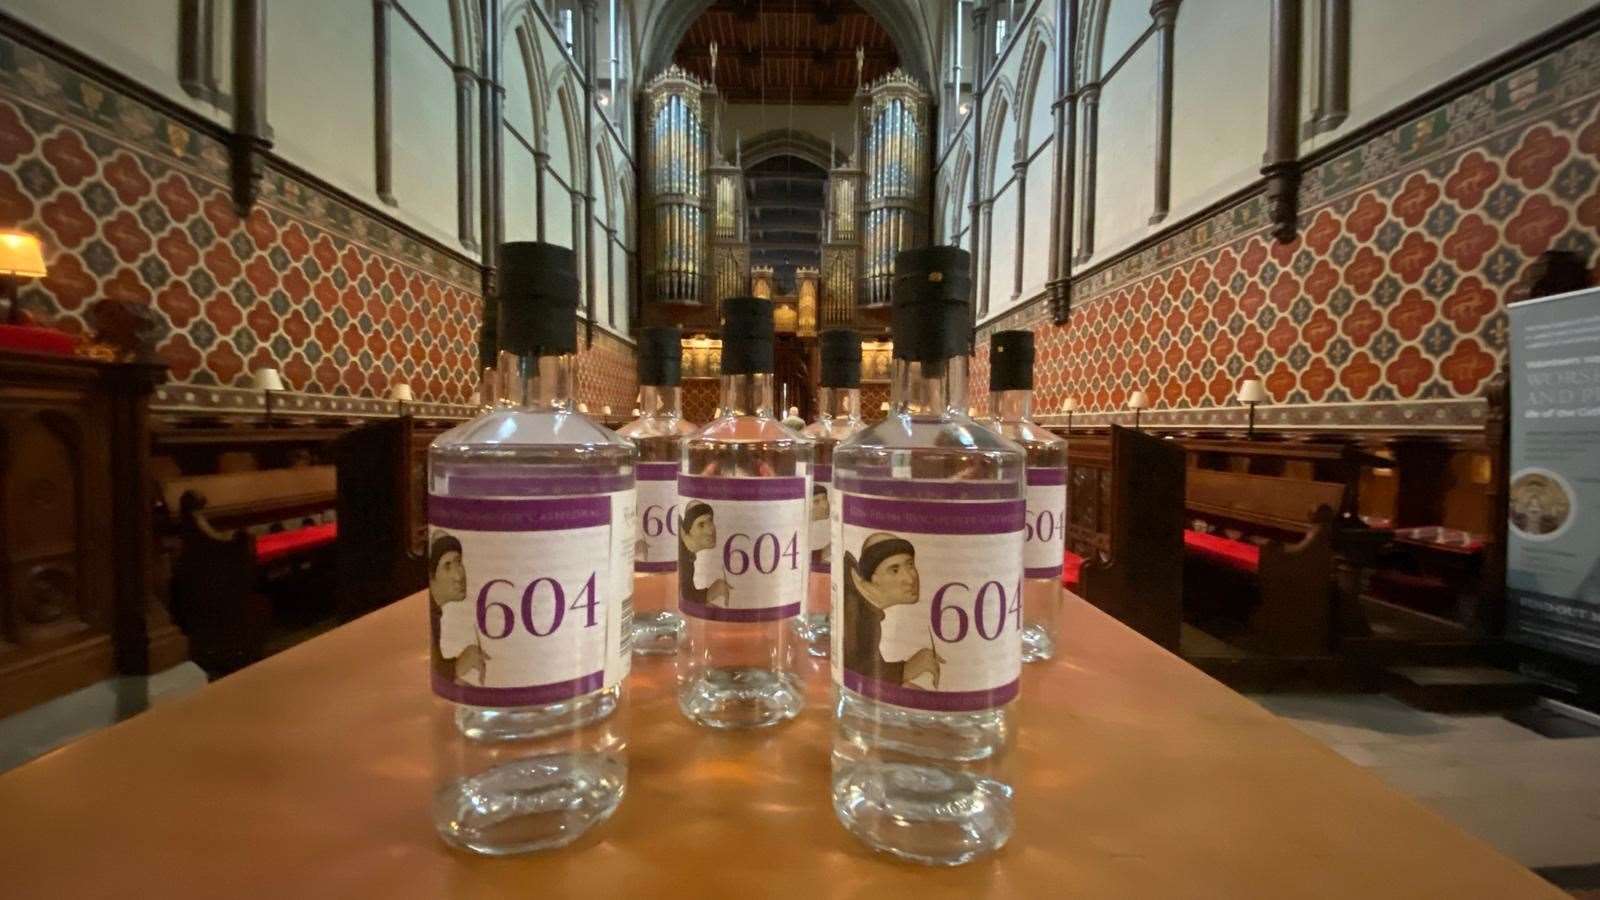 The new Rochester Cathedral gin